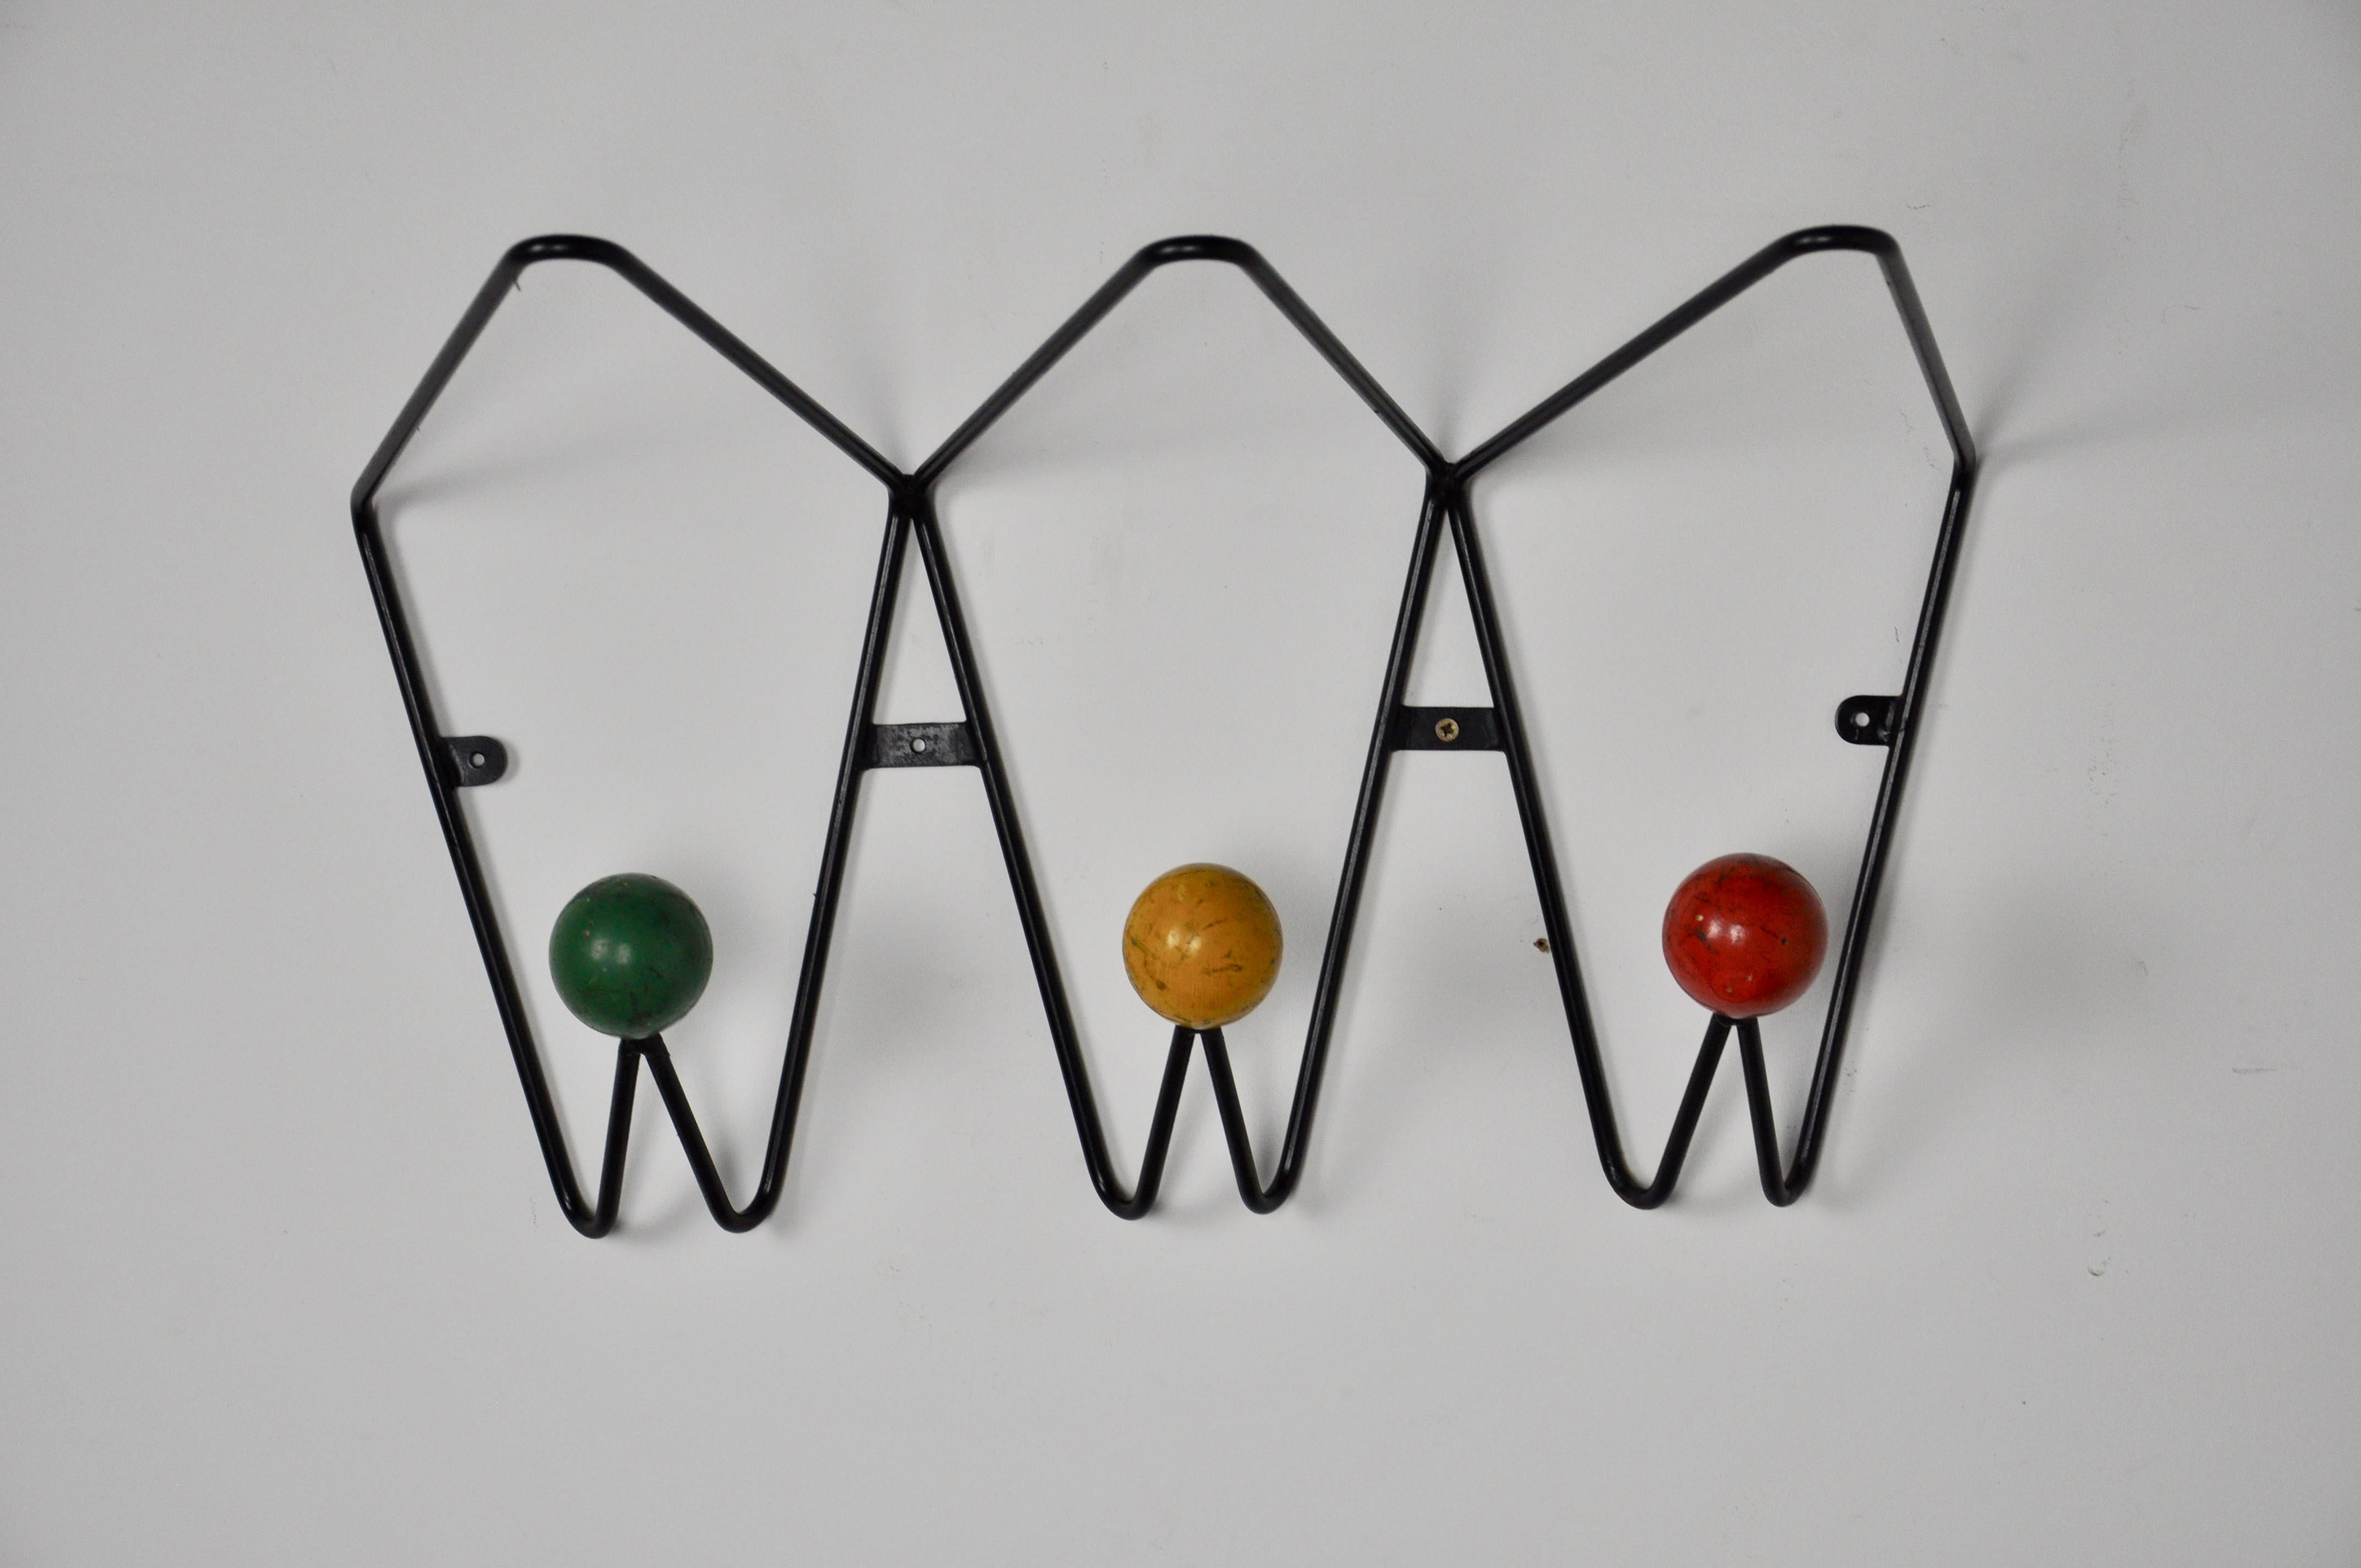 Coat rack composed of 3 balls of color green yellow red in wood. Structure in metal of black color. The balls have a patina.